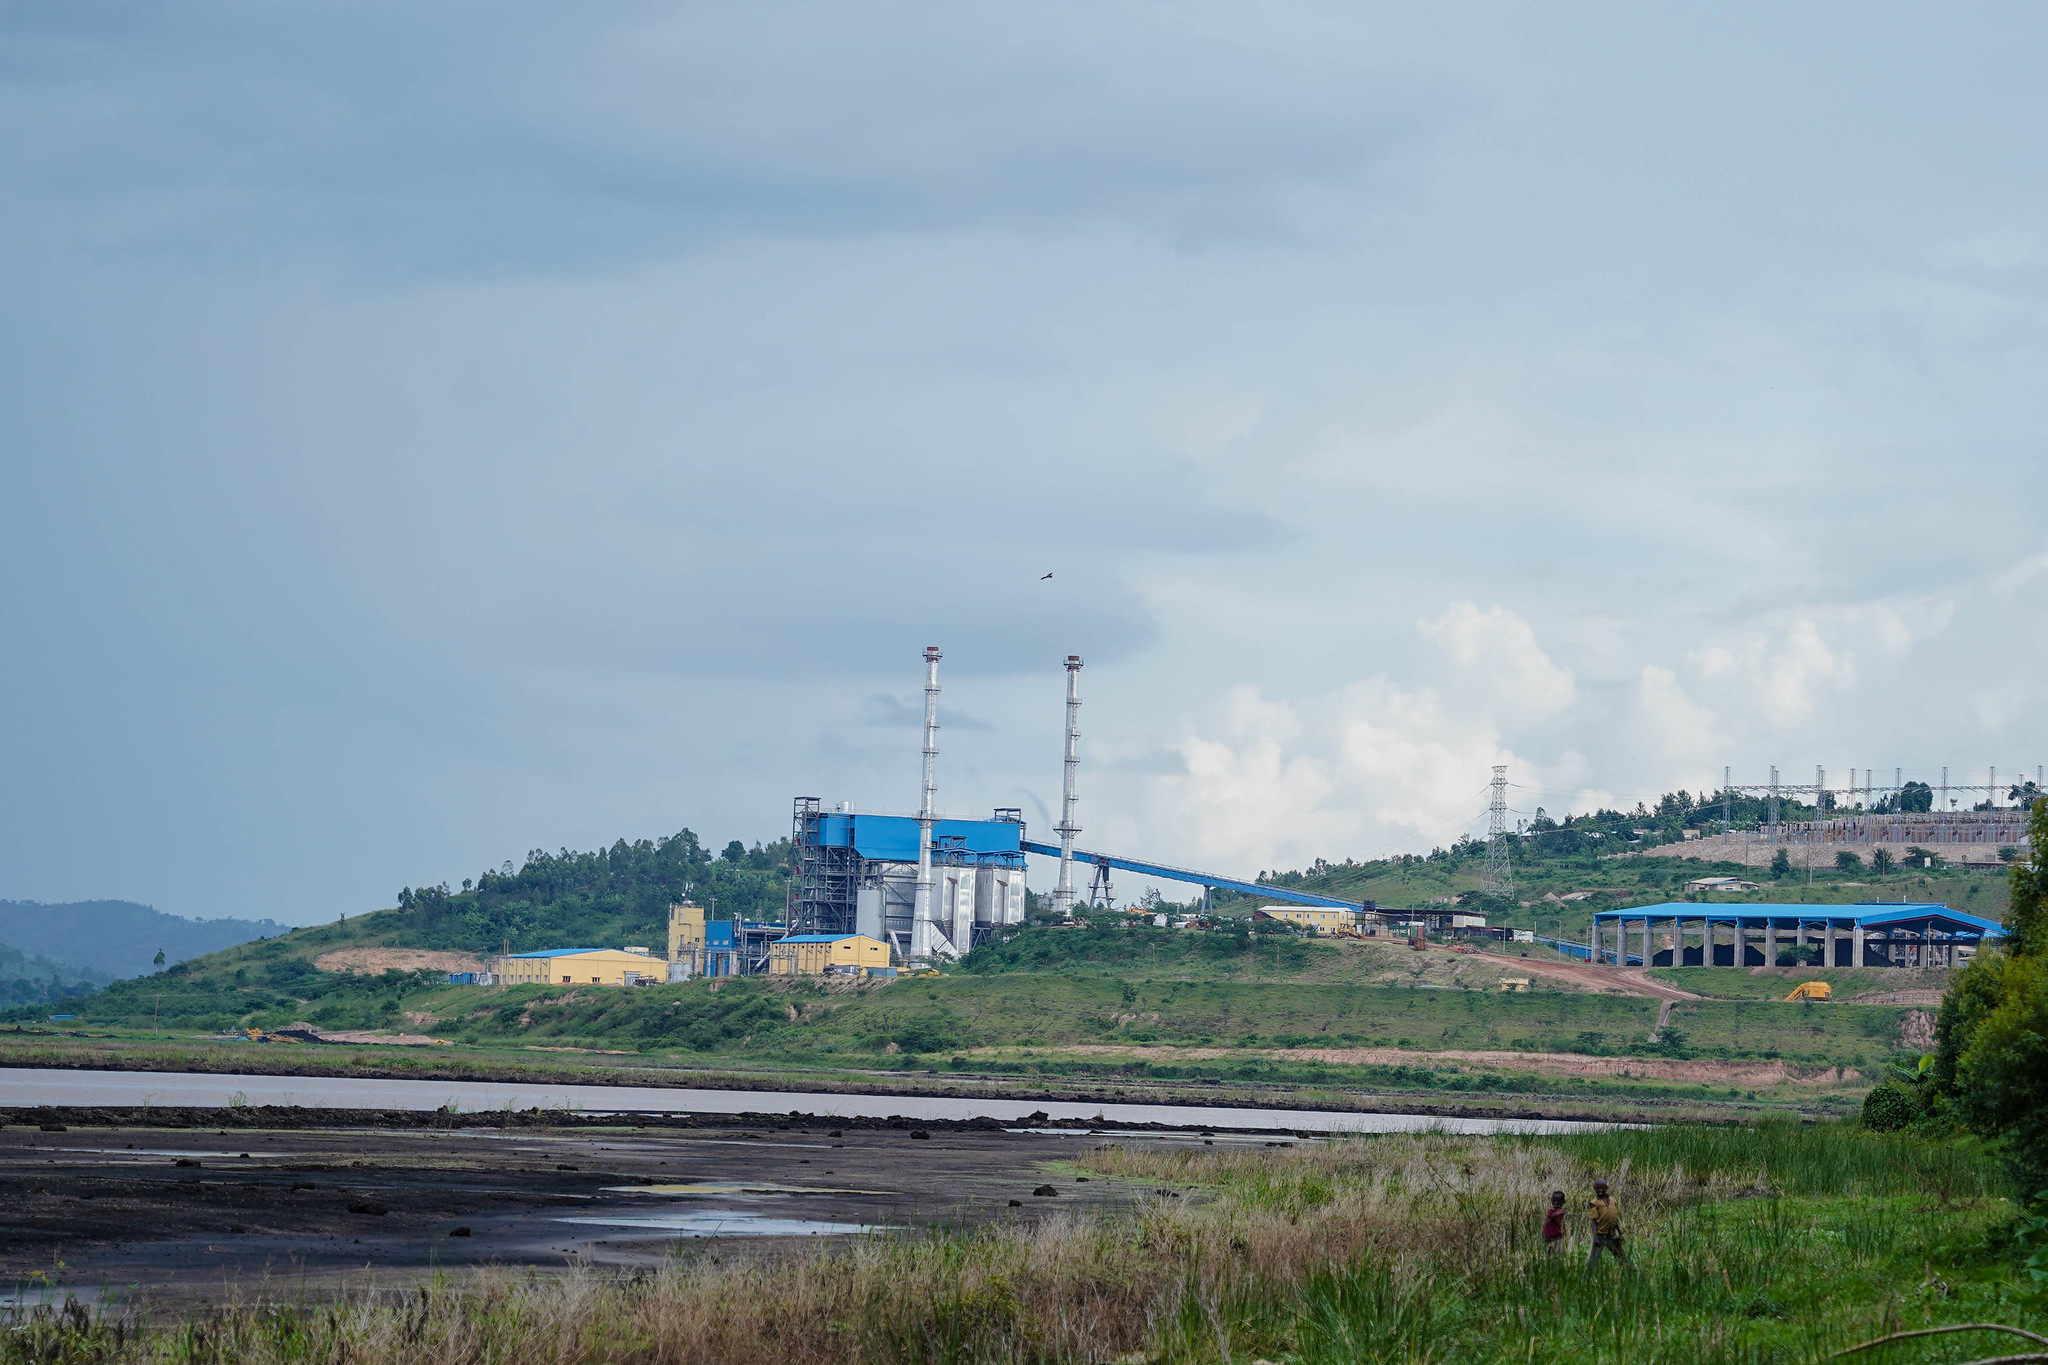 A view of Gisagara peat power plant that is under construction and sources of peat. Photo: Dan Nsengiyumva.